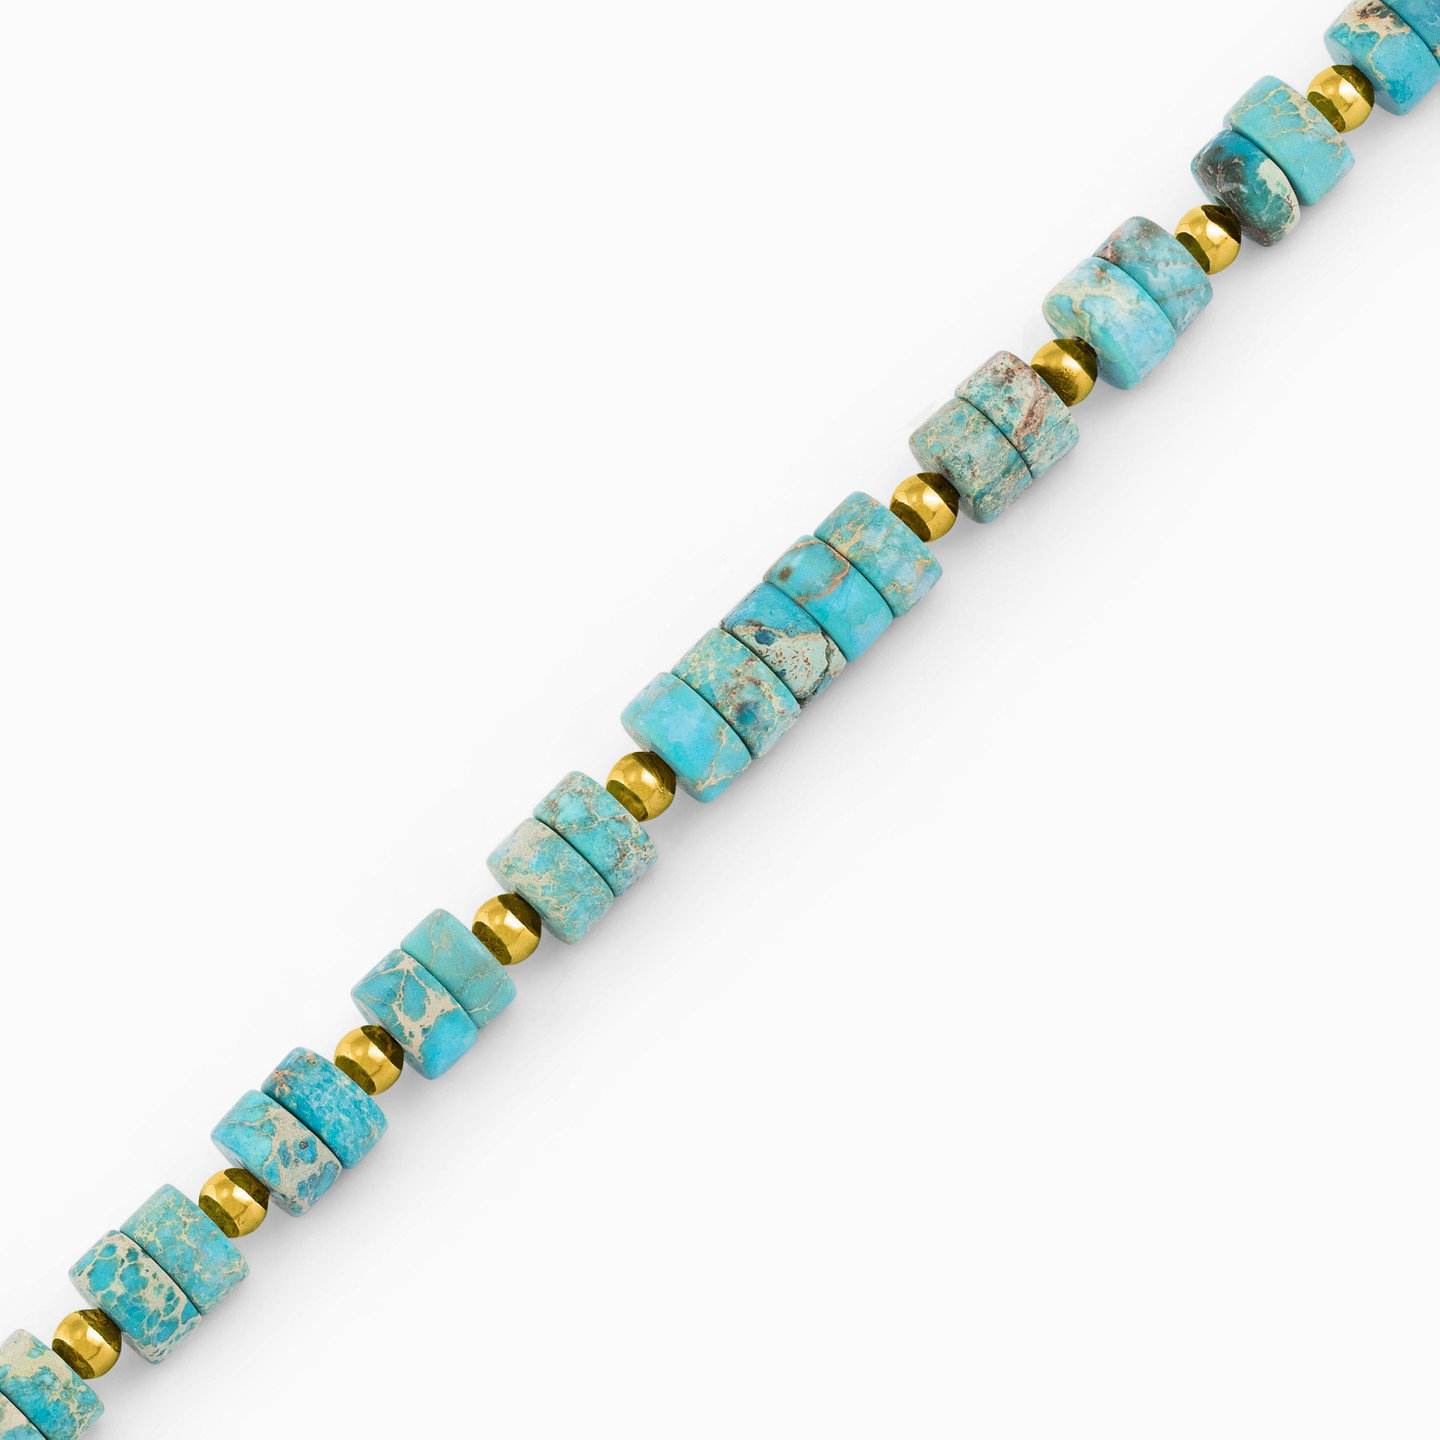 Gold Plated Colored Stones Chain Bracelet - 3